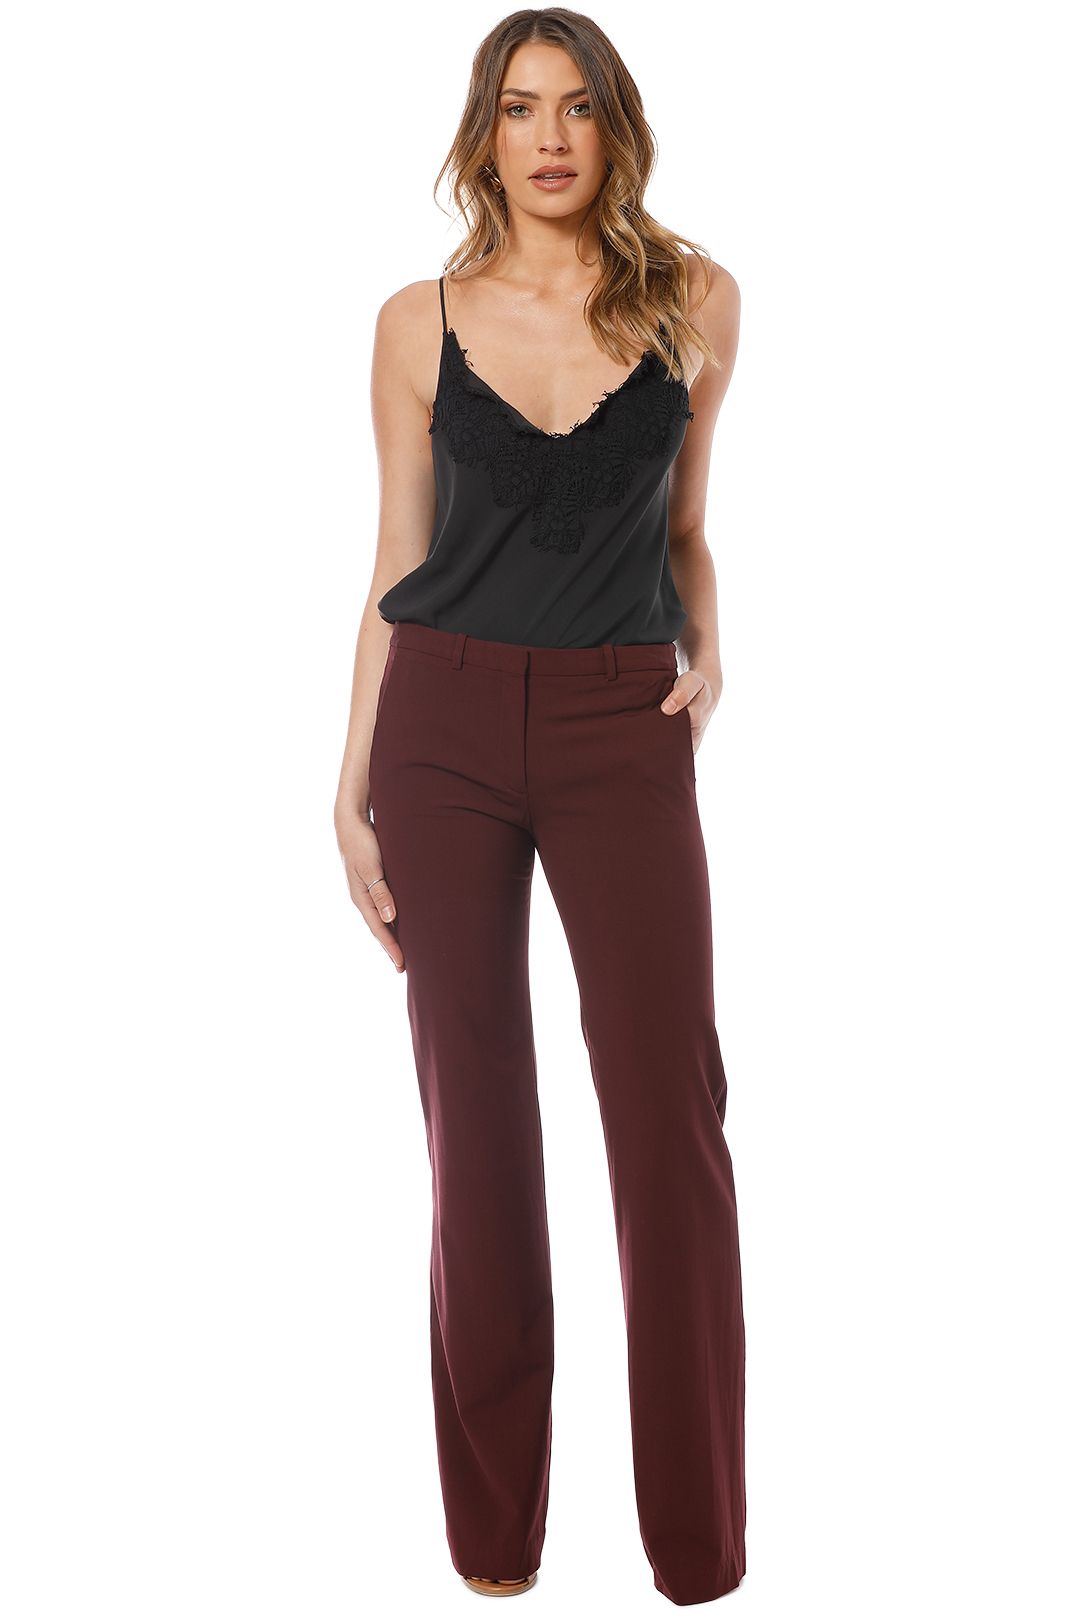 Theory - Crepe Pant - Burgundy - Front